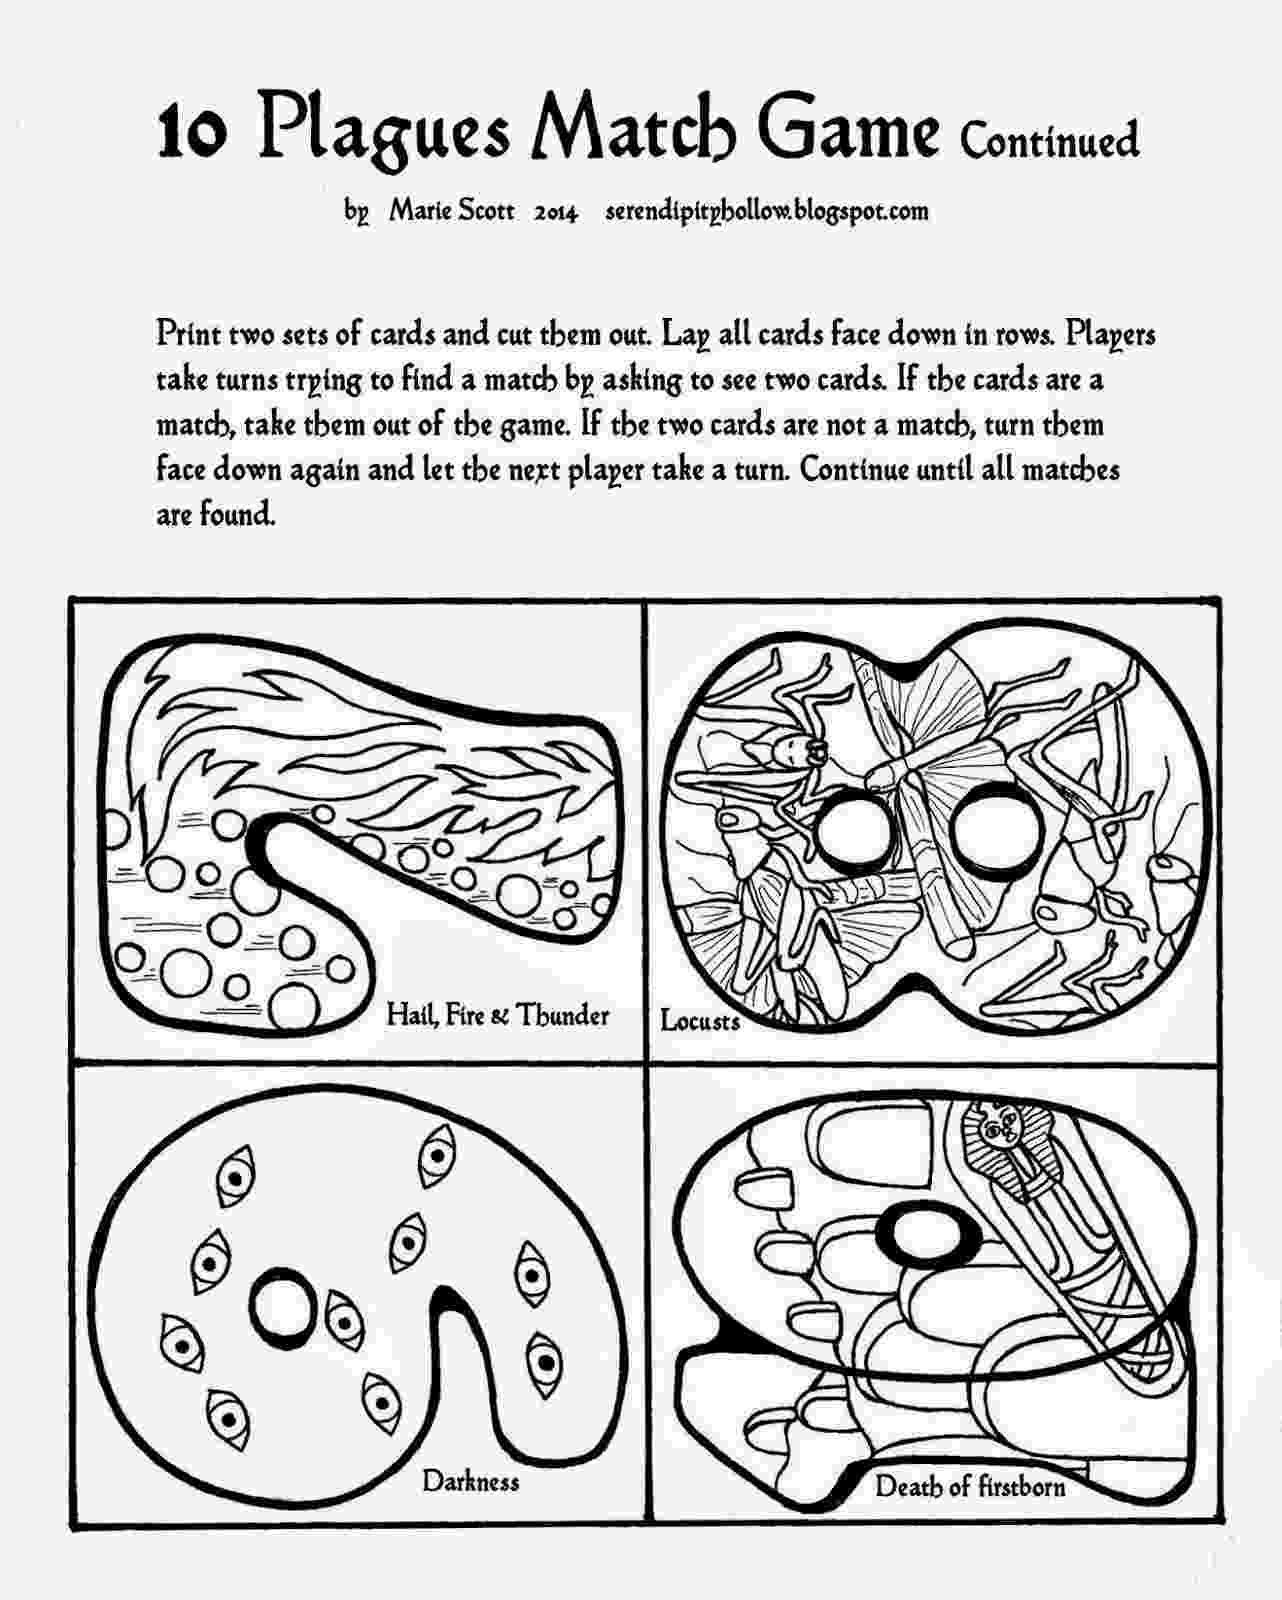 ten plagues of egypt coloring pages the ten plagues of egypt worksheet pack children39s coloring of pages ten plagues egypt 